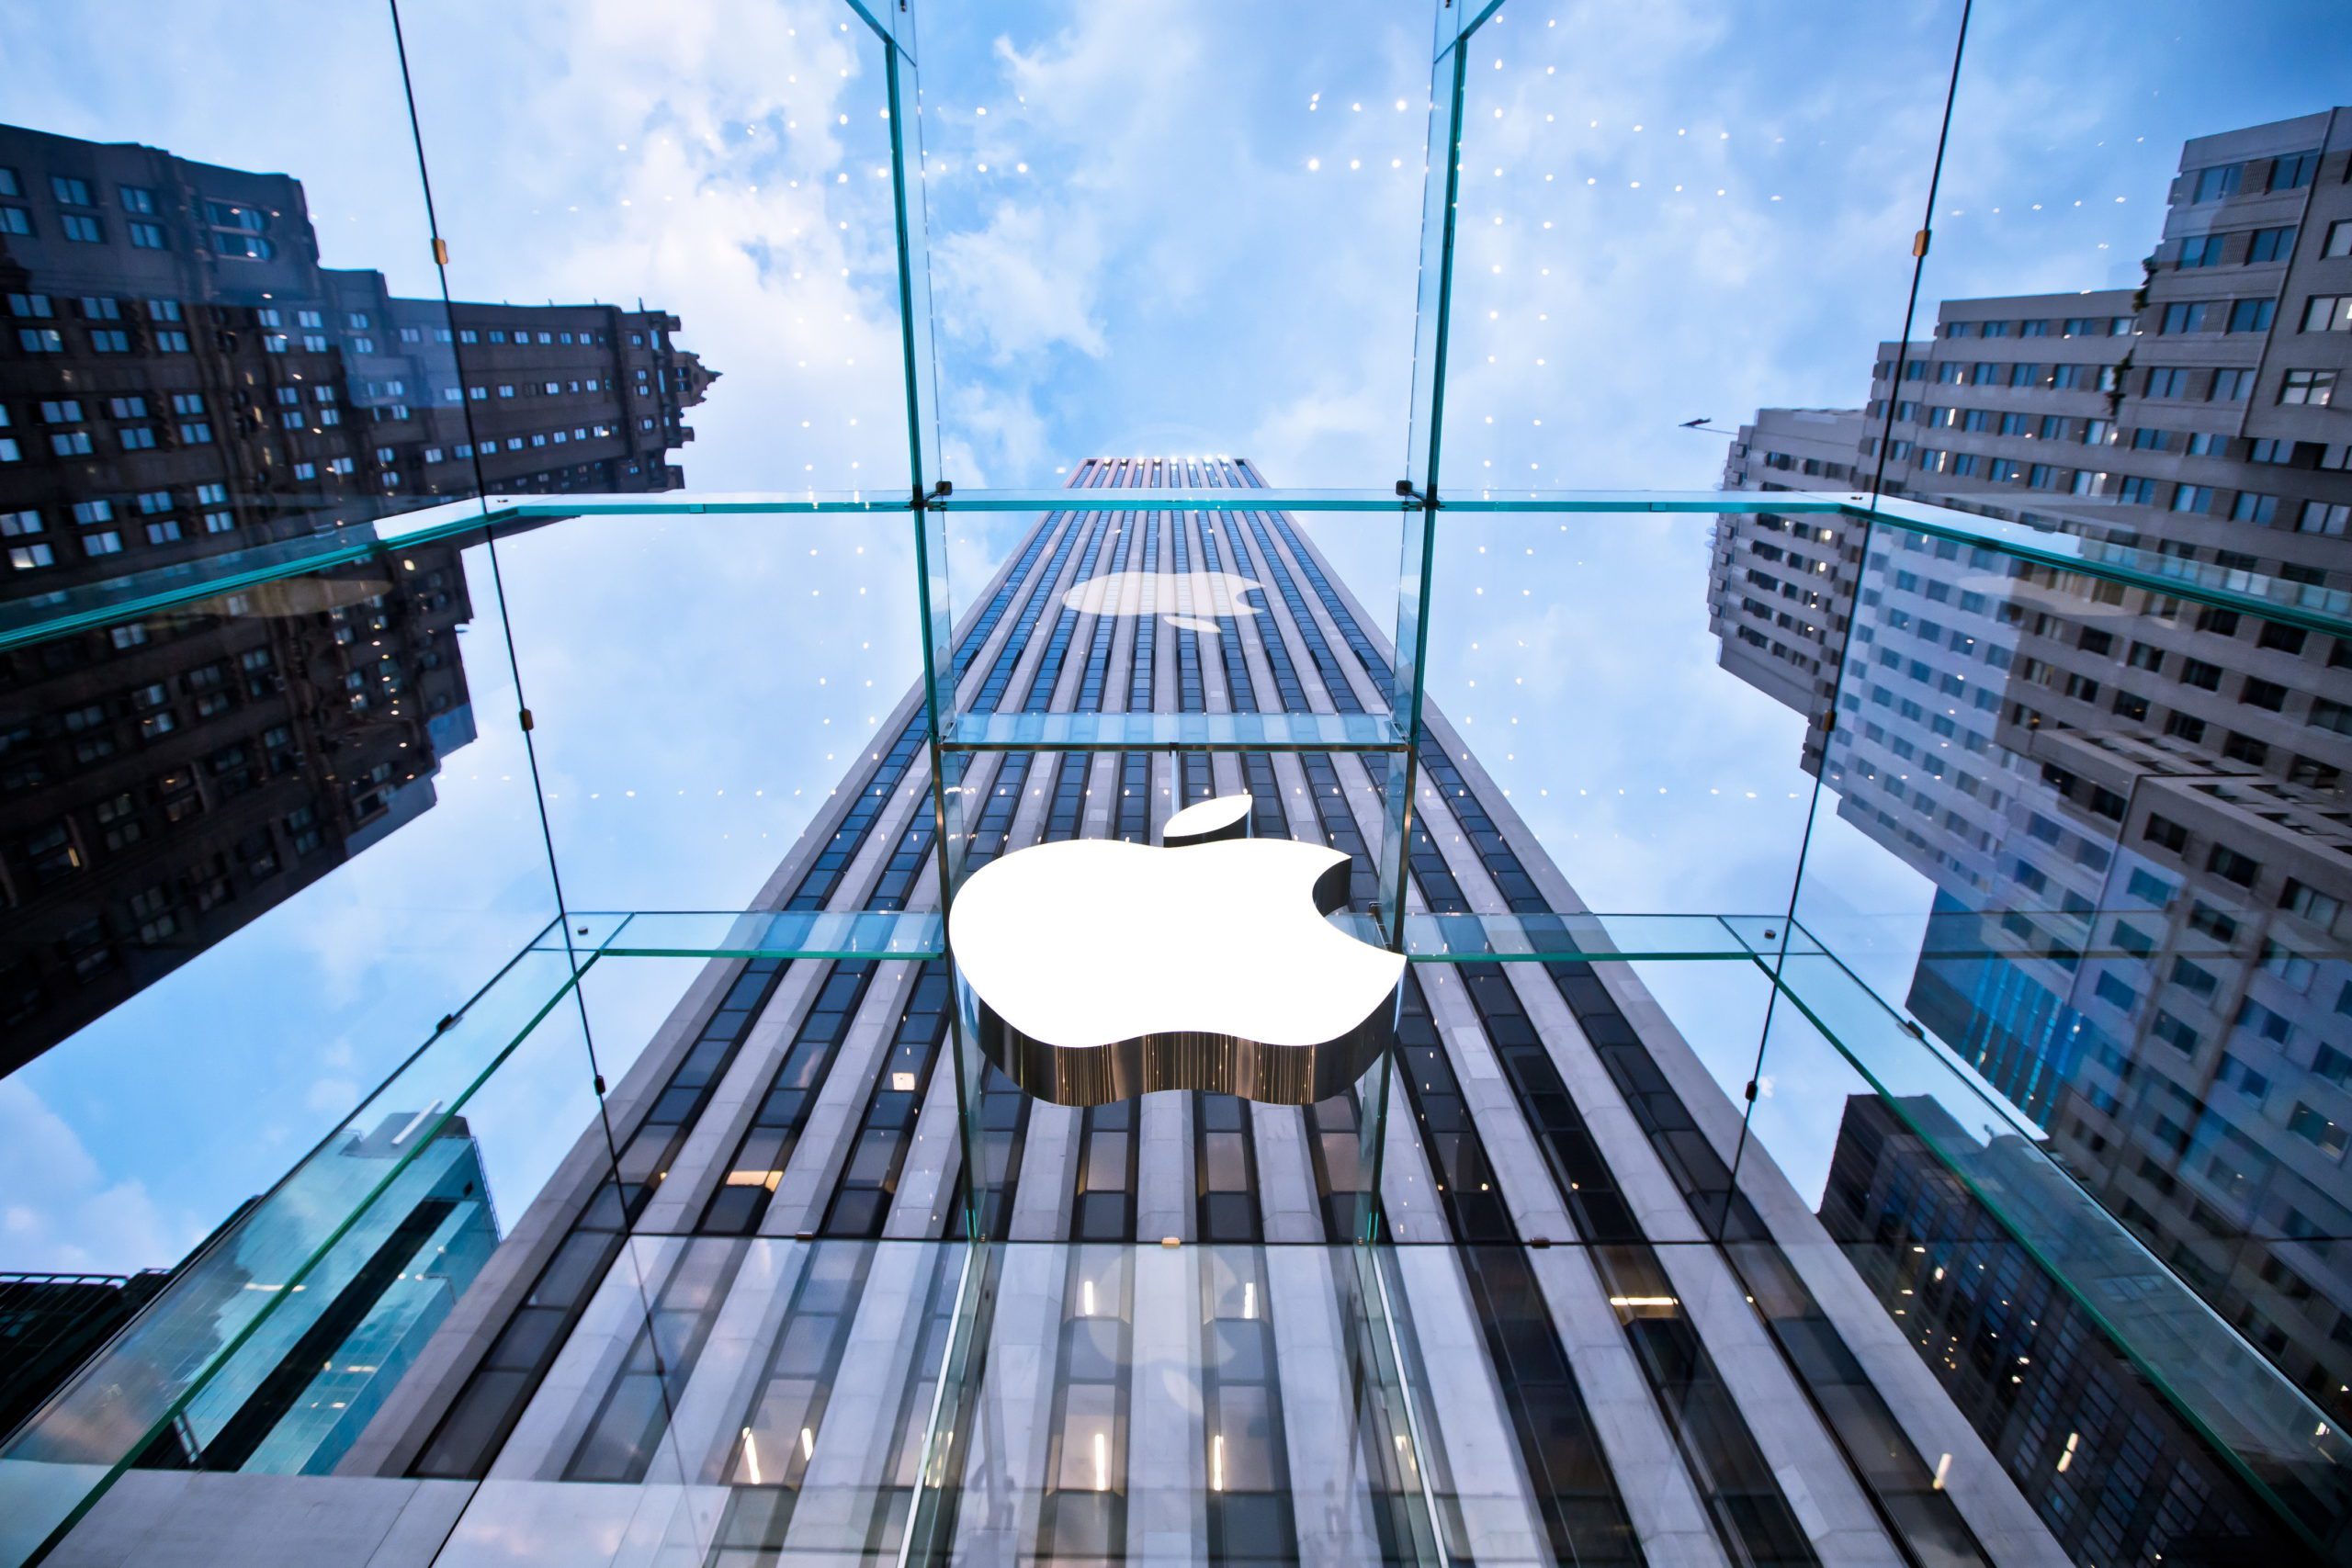 Apple store on Fifth Avenue in New York City. | Image from Shutterstock